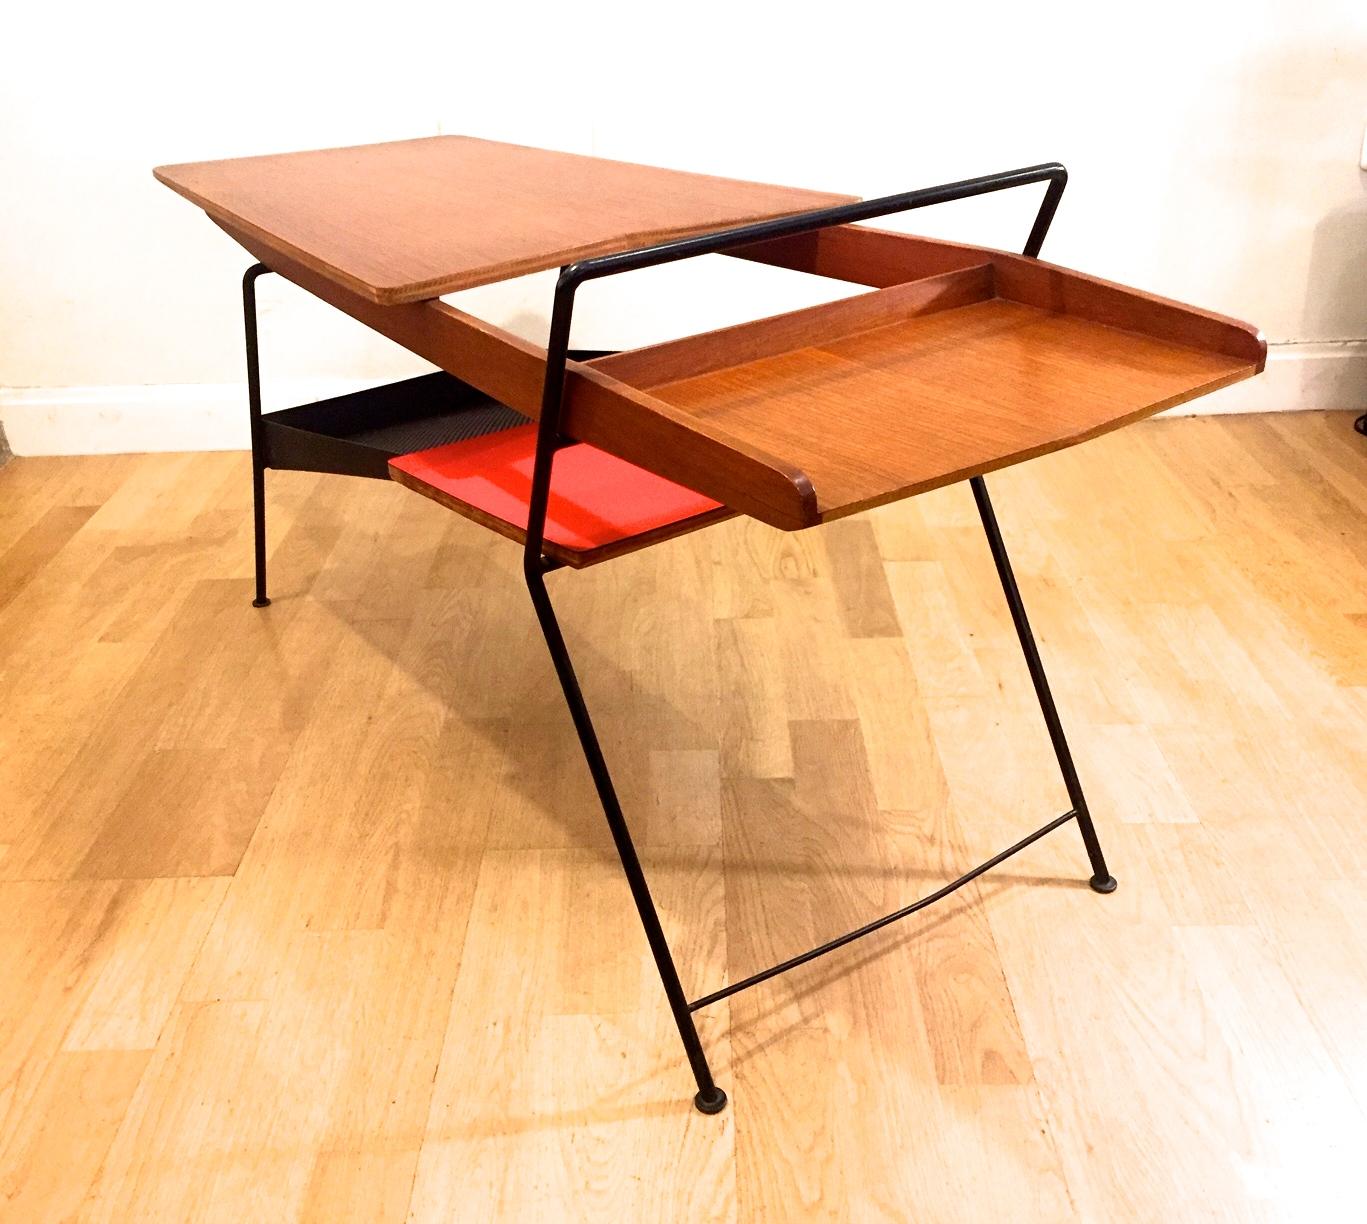 Italian Pierre Guariche Style Coffee Table, Italy, 1950 For Sale